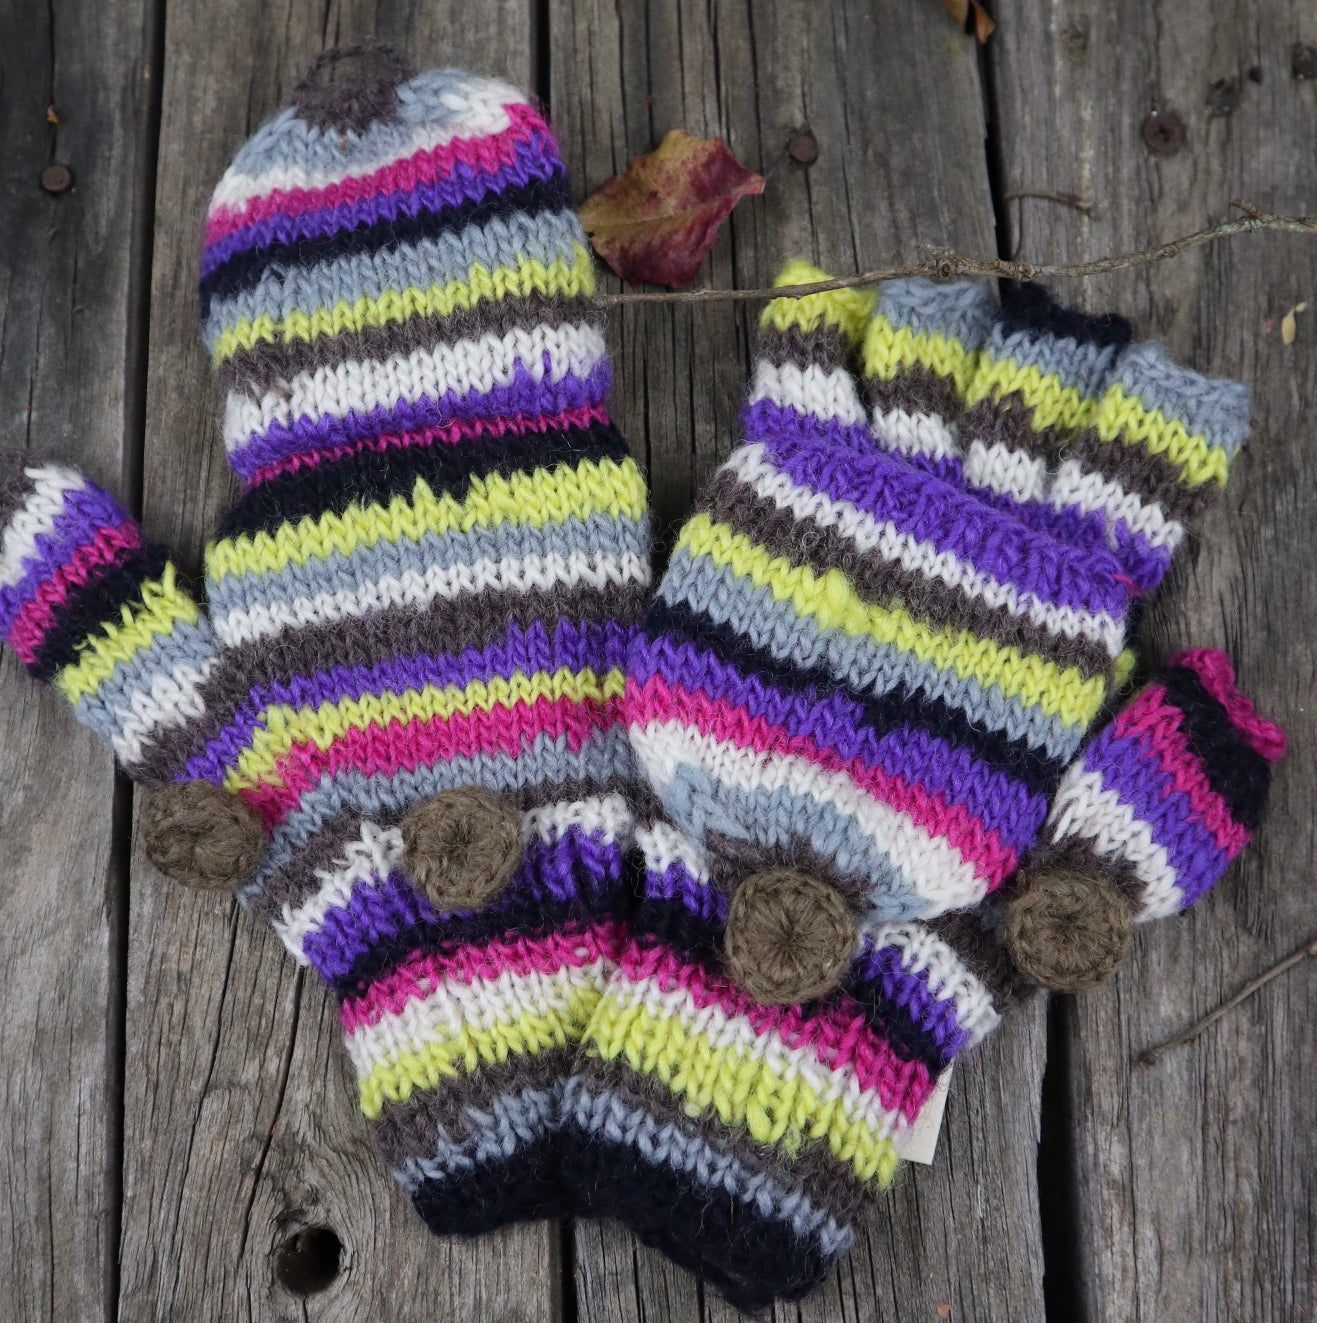 Fair Trade Ethical Children's Striped Fingerless Gloves with Cap in Pink Purple, Yellow and Grey